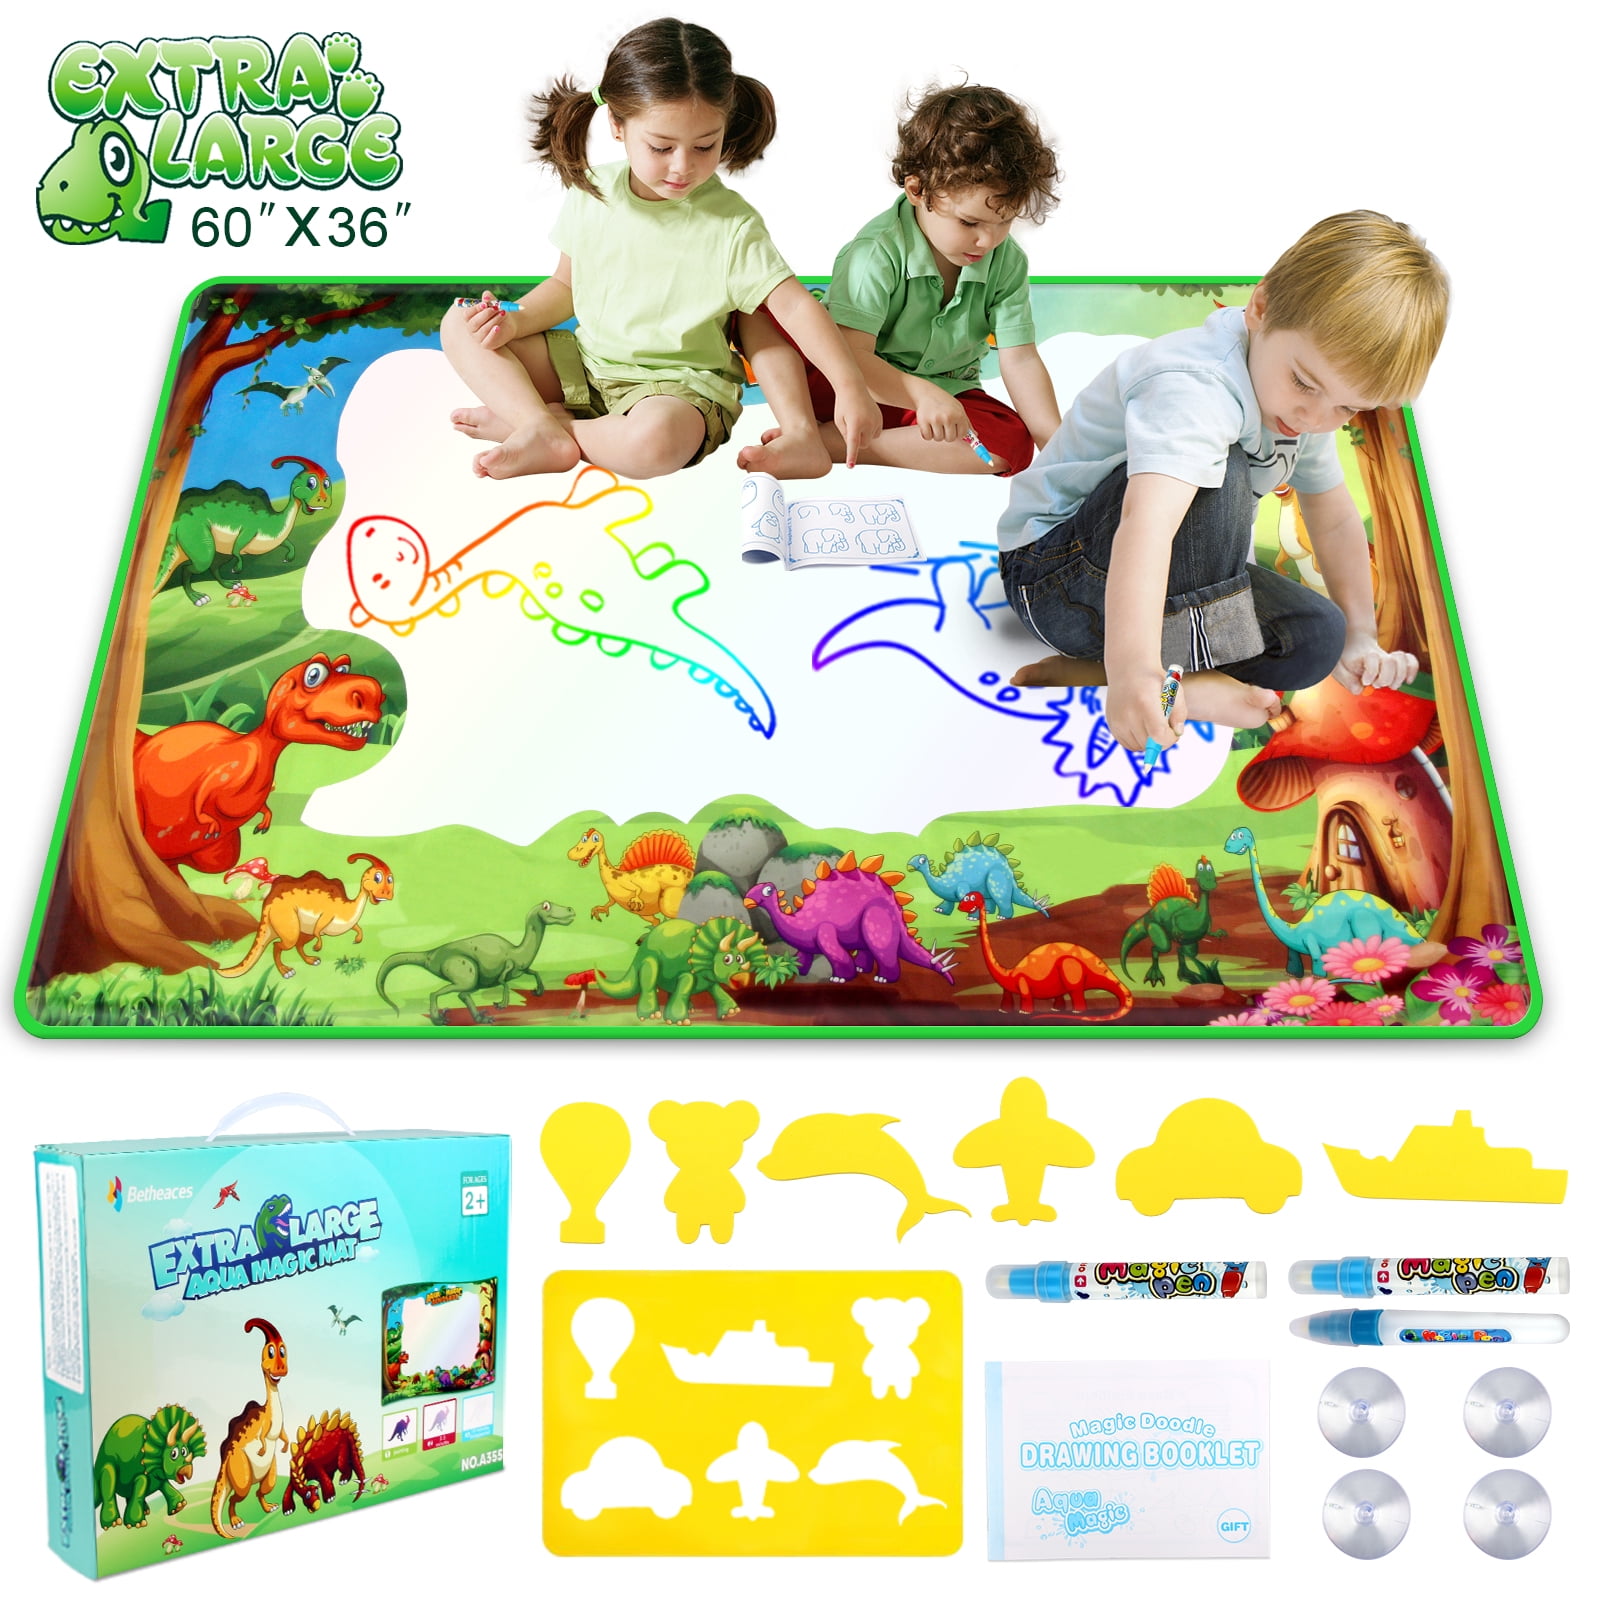 Buy wholesale Science4you Washable Animal Painting Mat - Water Drawing Mat  Set for Toddlers with Dinosaurs with 7 Water Pens for Toddlers, STEM Toys  and Games for kids, Gifts for Boys and